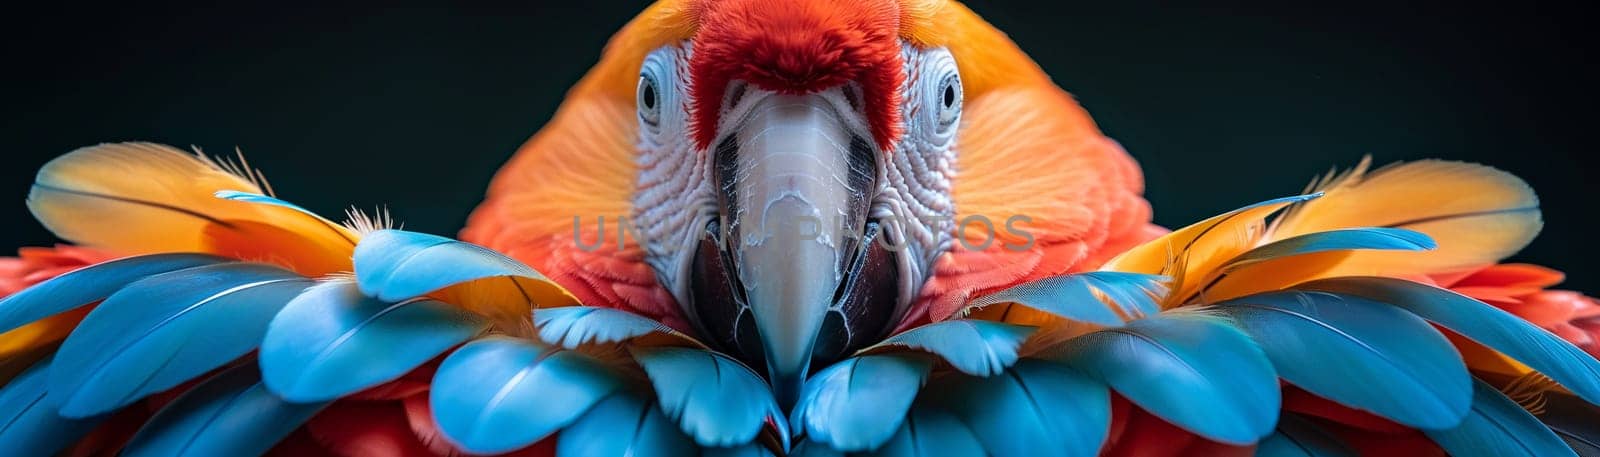 Close-up of a colorful parrots feathers by Benzoix